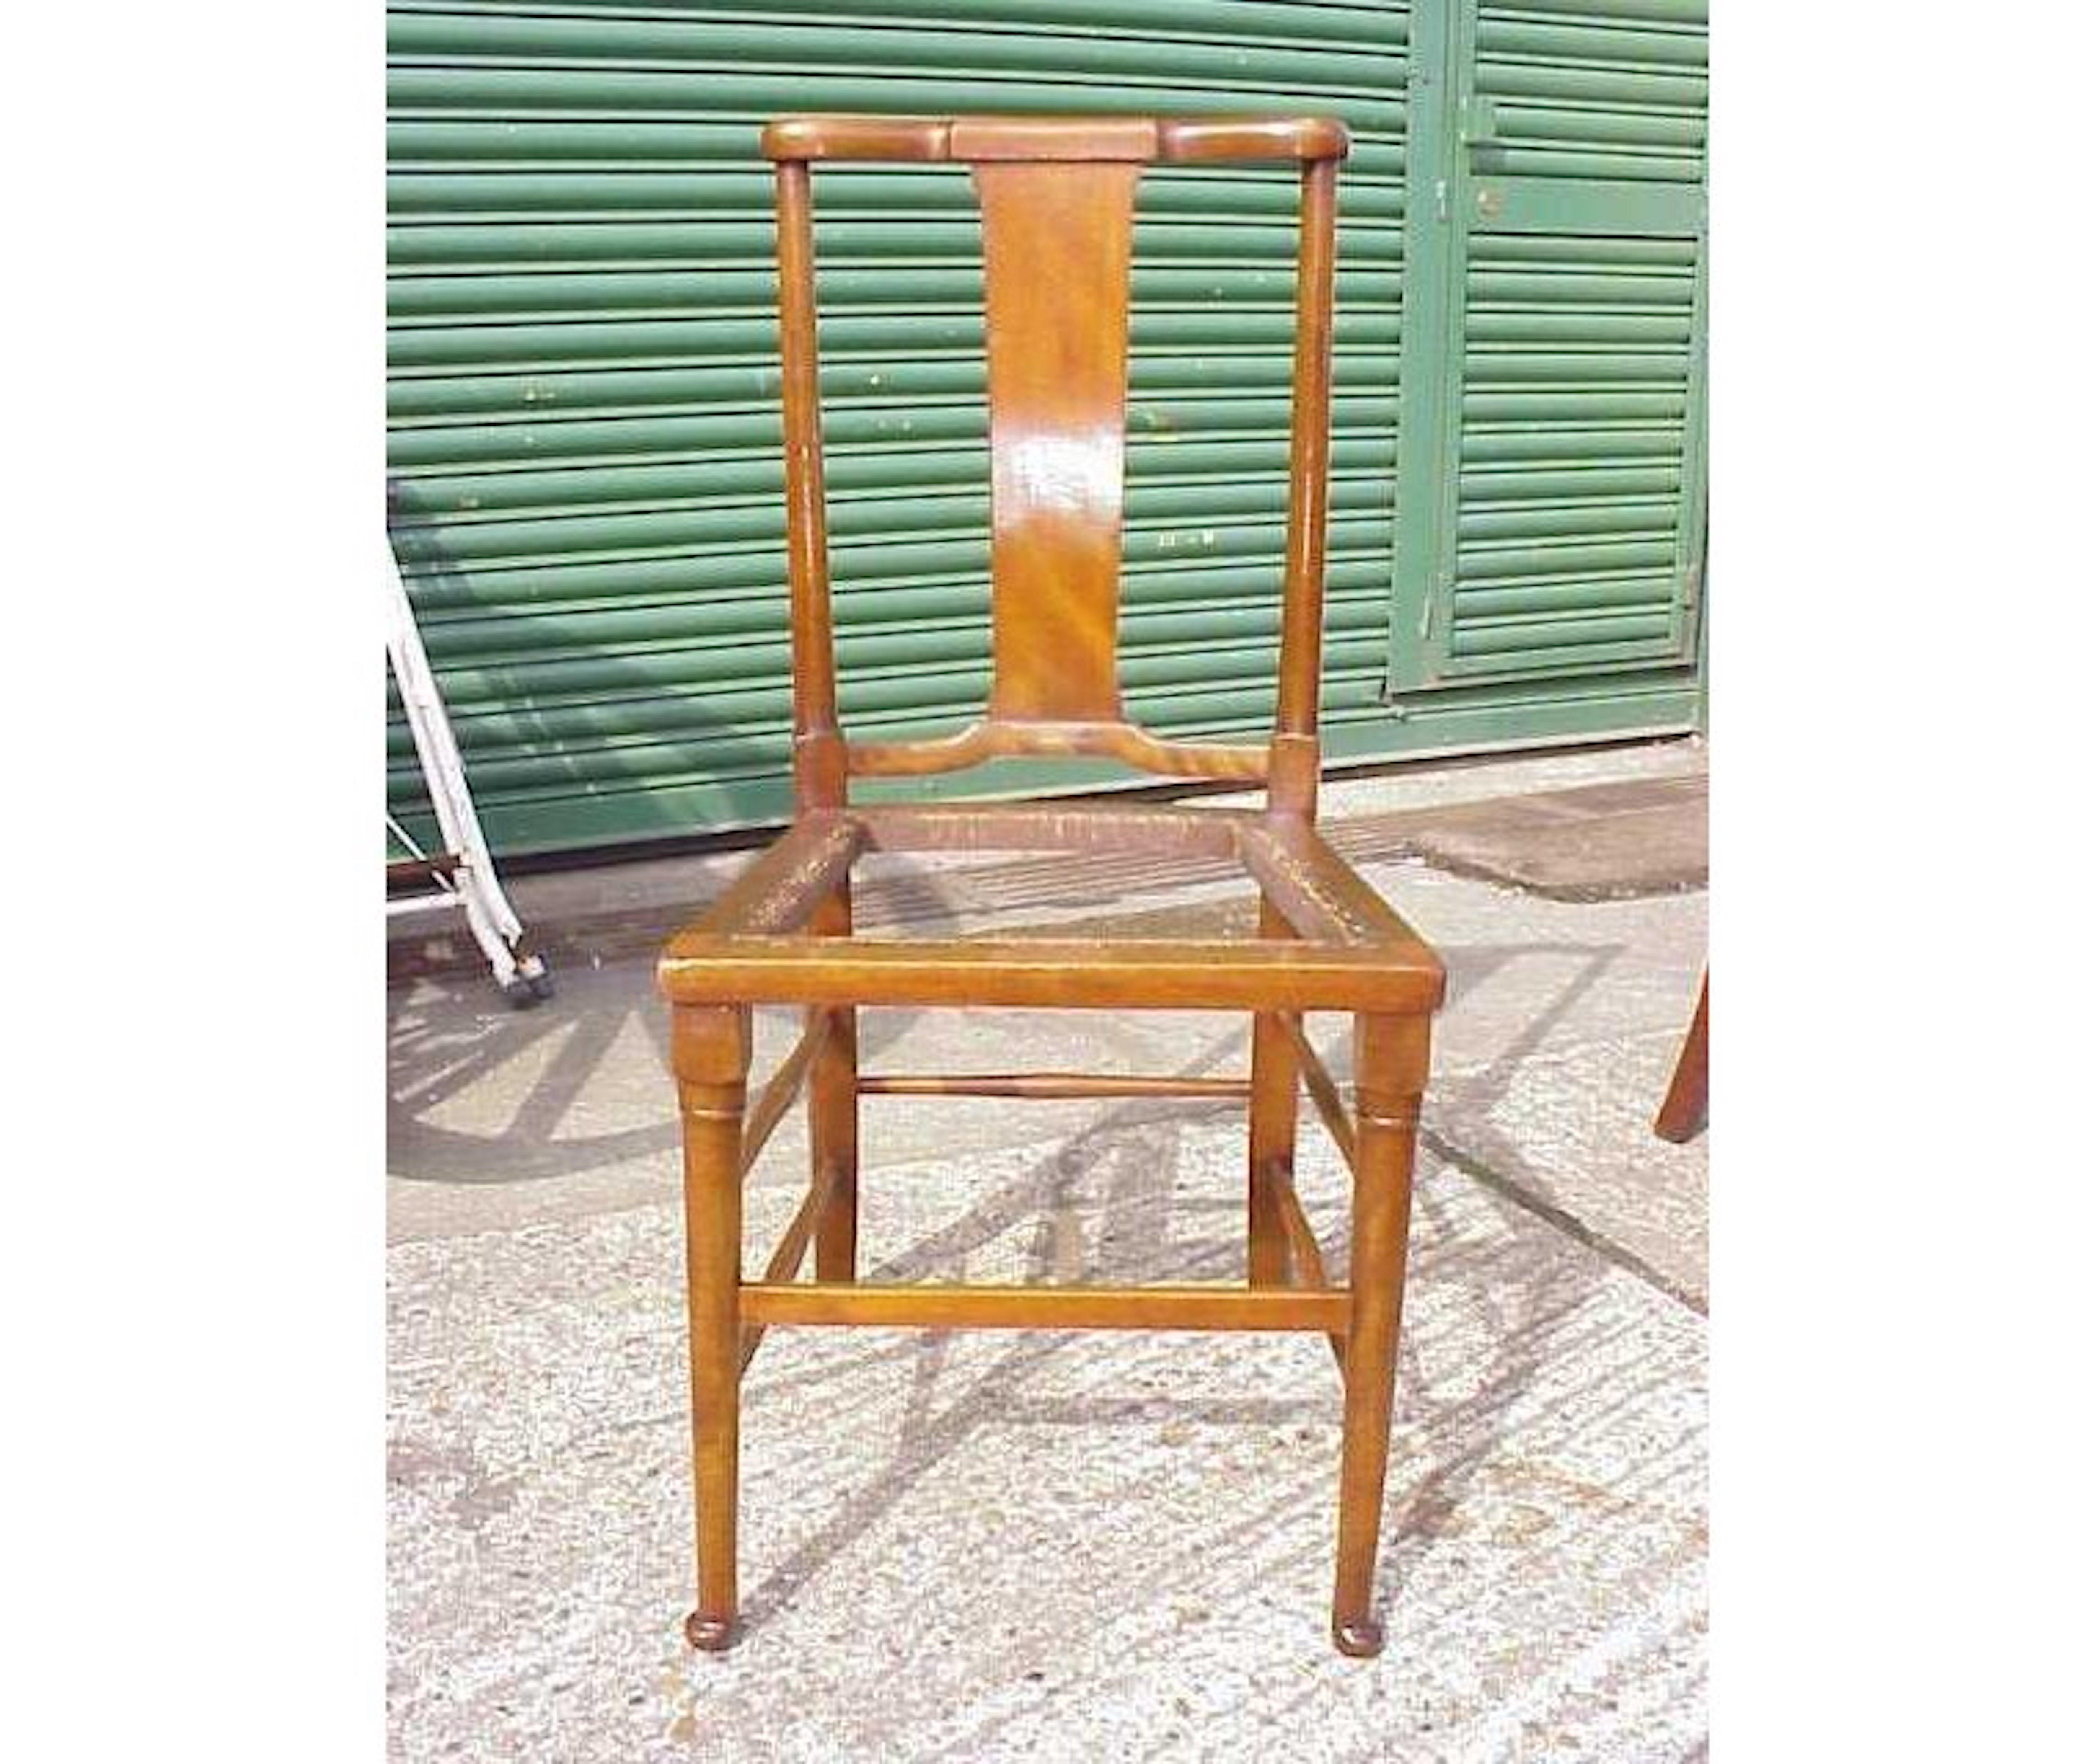 Morris & Co. A set of fourteen Arts & Crafts Queen Anne style mahogany dining chairs.
There are no armchairs with this set but I do have a rush seat armchair available in the same style if required, and I could possibly locate another armchair